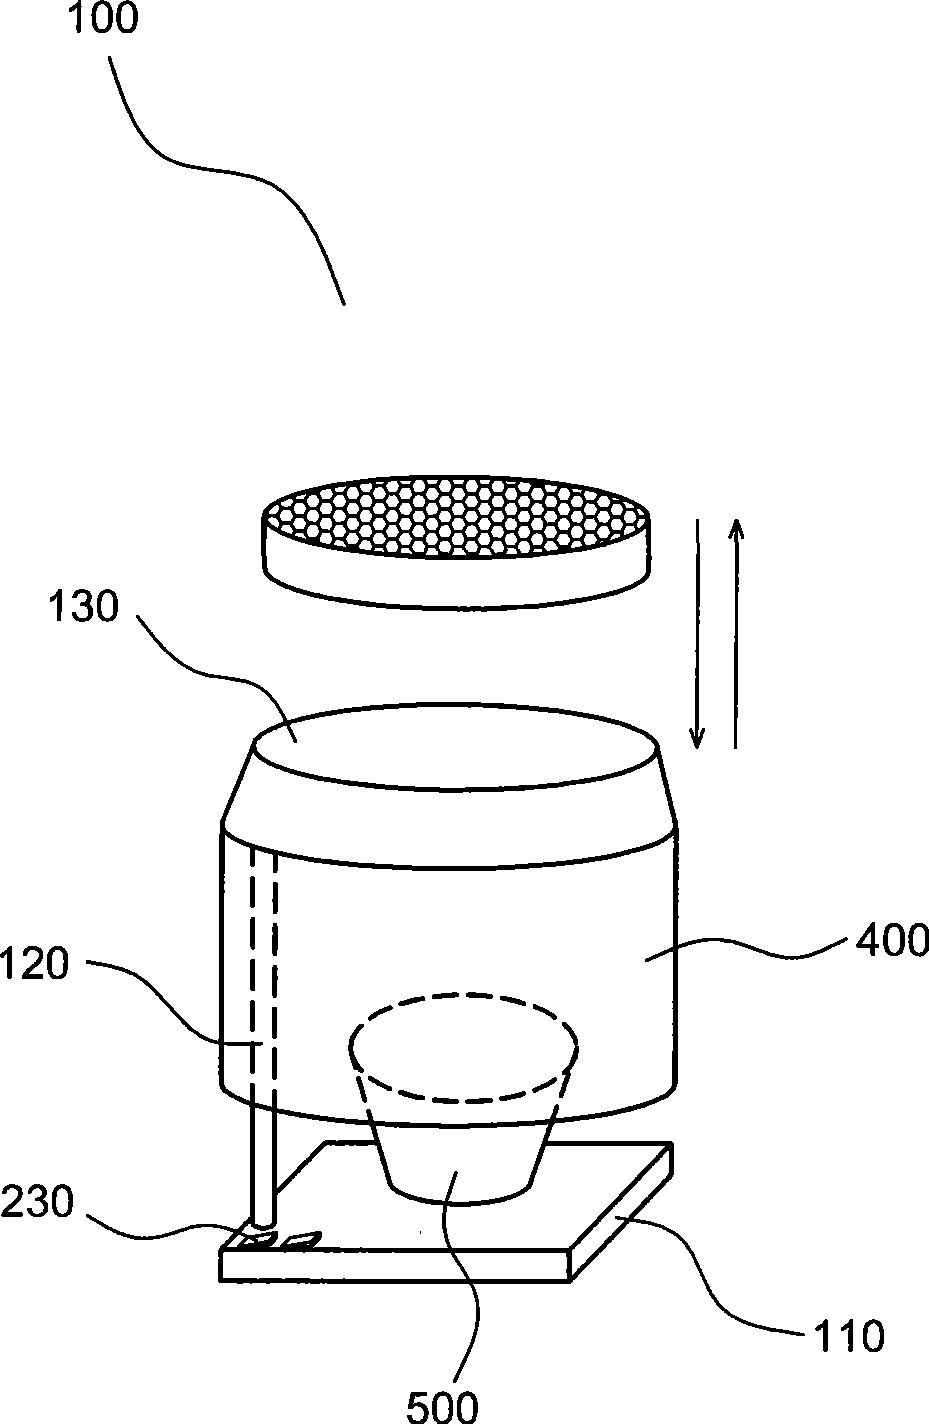 High-speed thermosistor for food